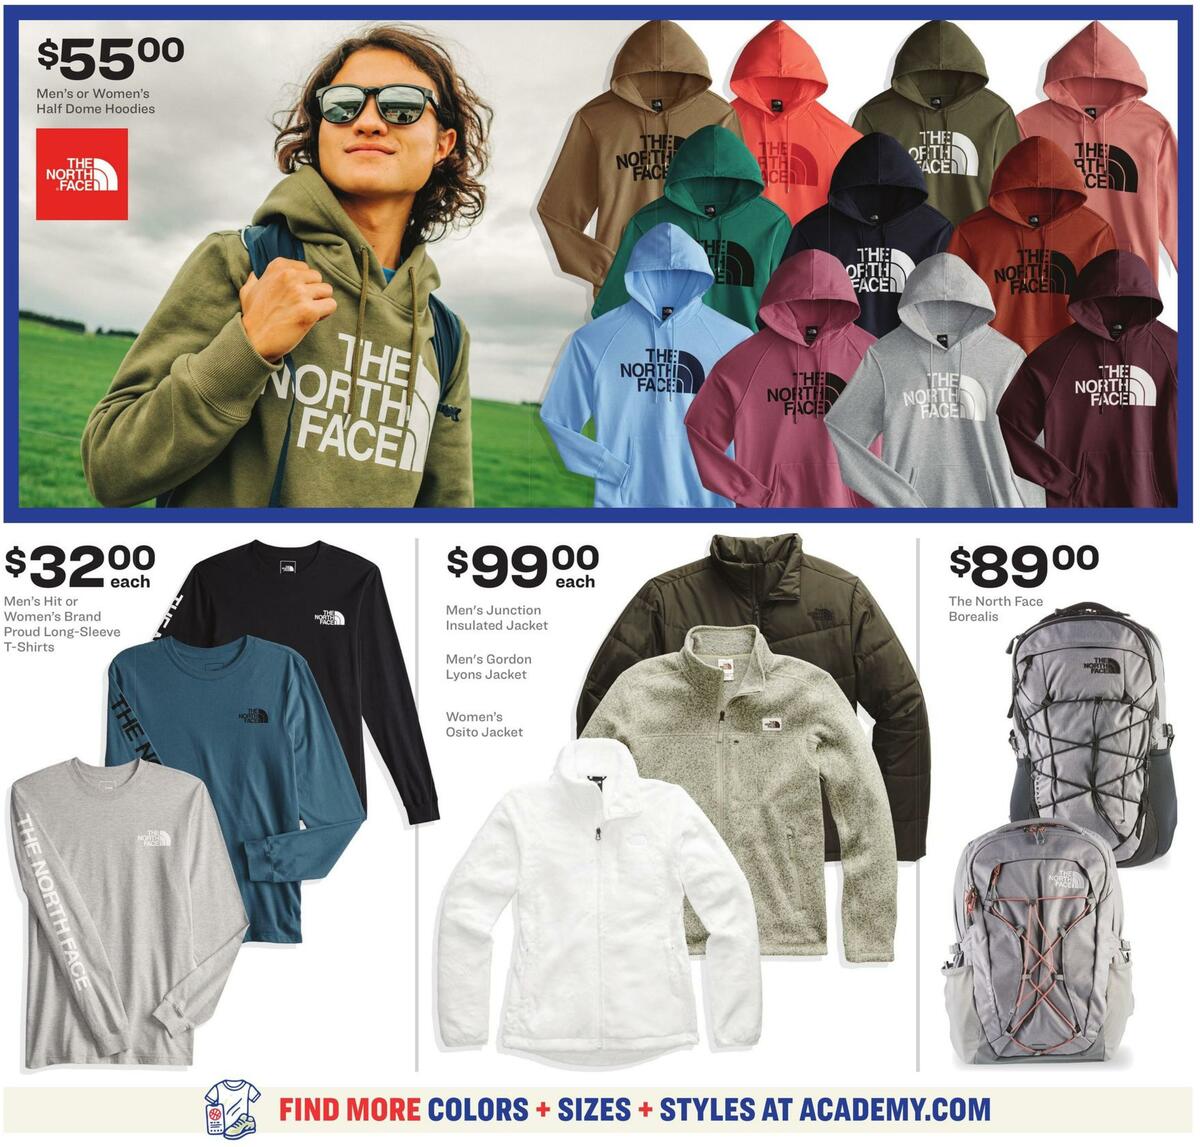 Academy Sports + Outdoors Weekly Ad from December 26